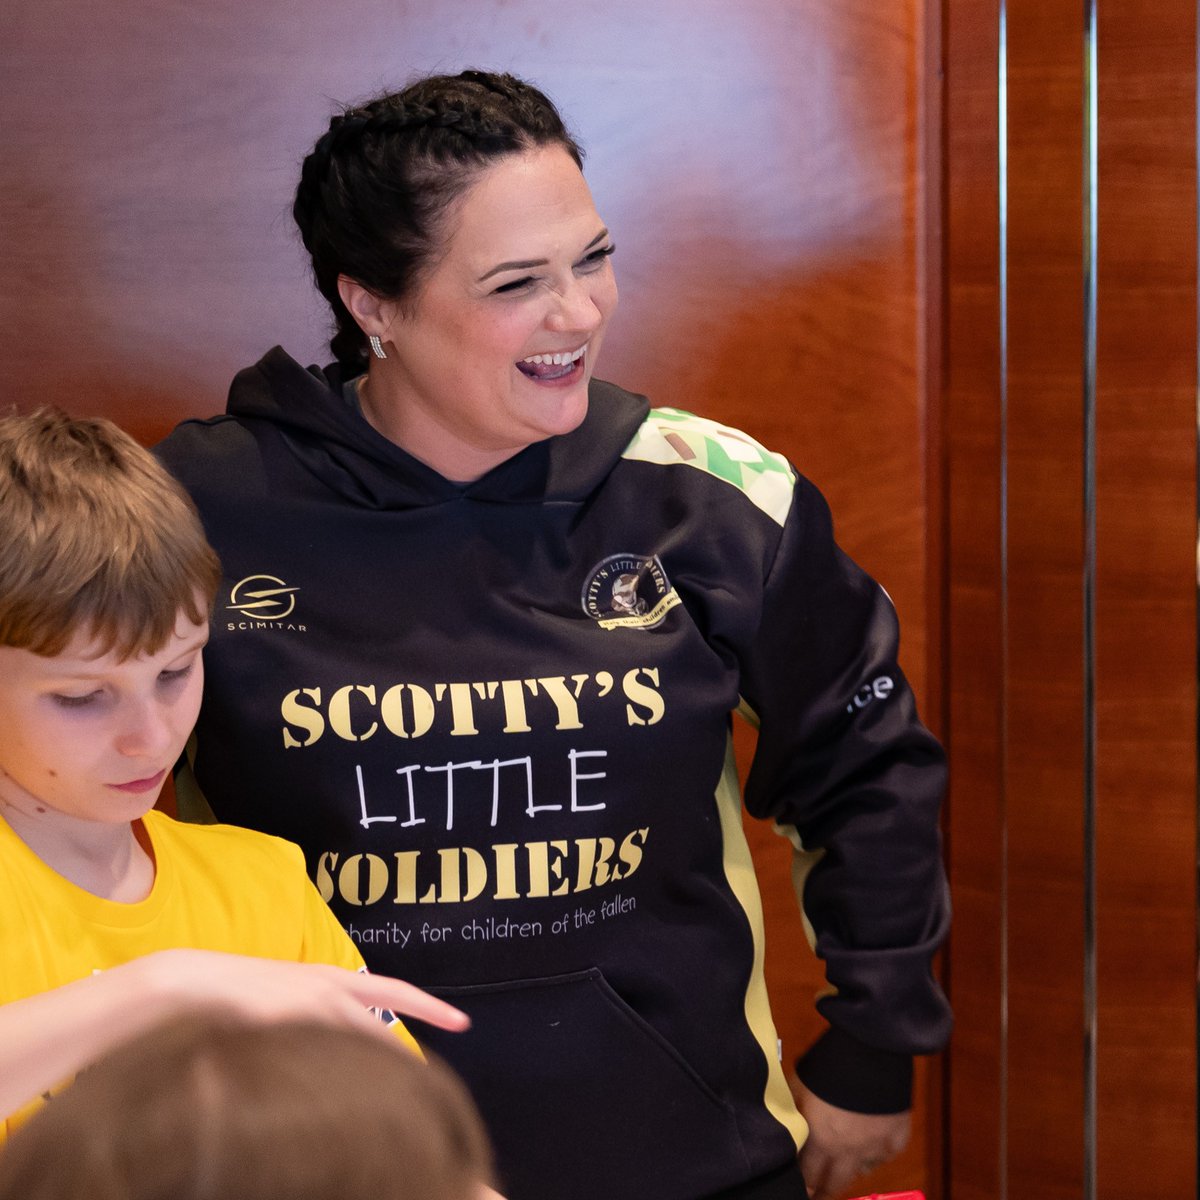 🌟 #PrinceHarry joined us at a Scotty's Little Soldiers event last Thursday🎉

#Scottys Founder, Nikki shared, 'It was amazing to see all the smiles in the room when Prince Harry walked through the door.”

LEARN MORE: bit.ly/4bShcA3

#MilitaryFamilies #TheDukeOfSussex